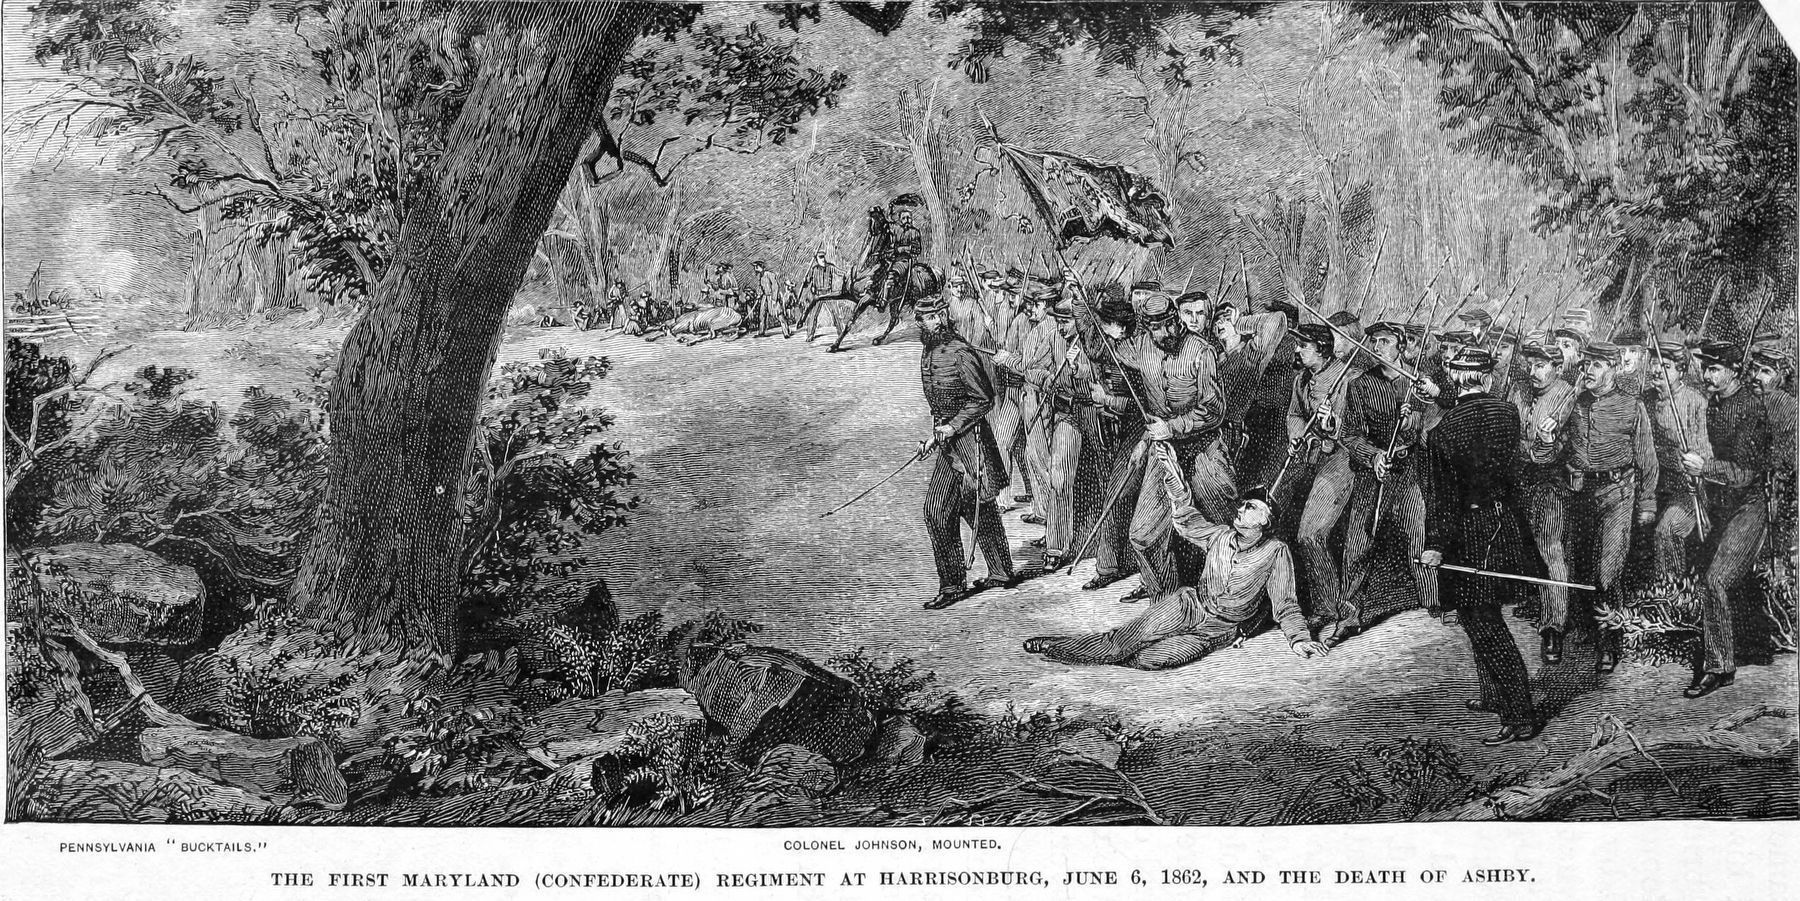 First Maryland (Confederate) Regiment at Harrisonburg, June 6, 1862 and the Death of Ashby image. Click for full size.